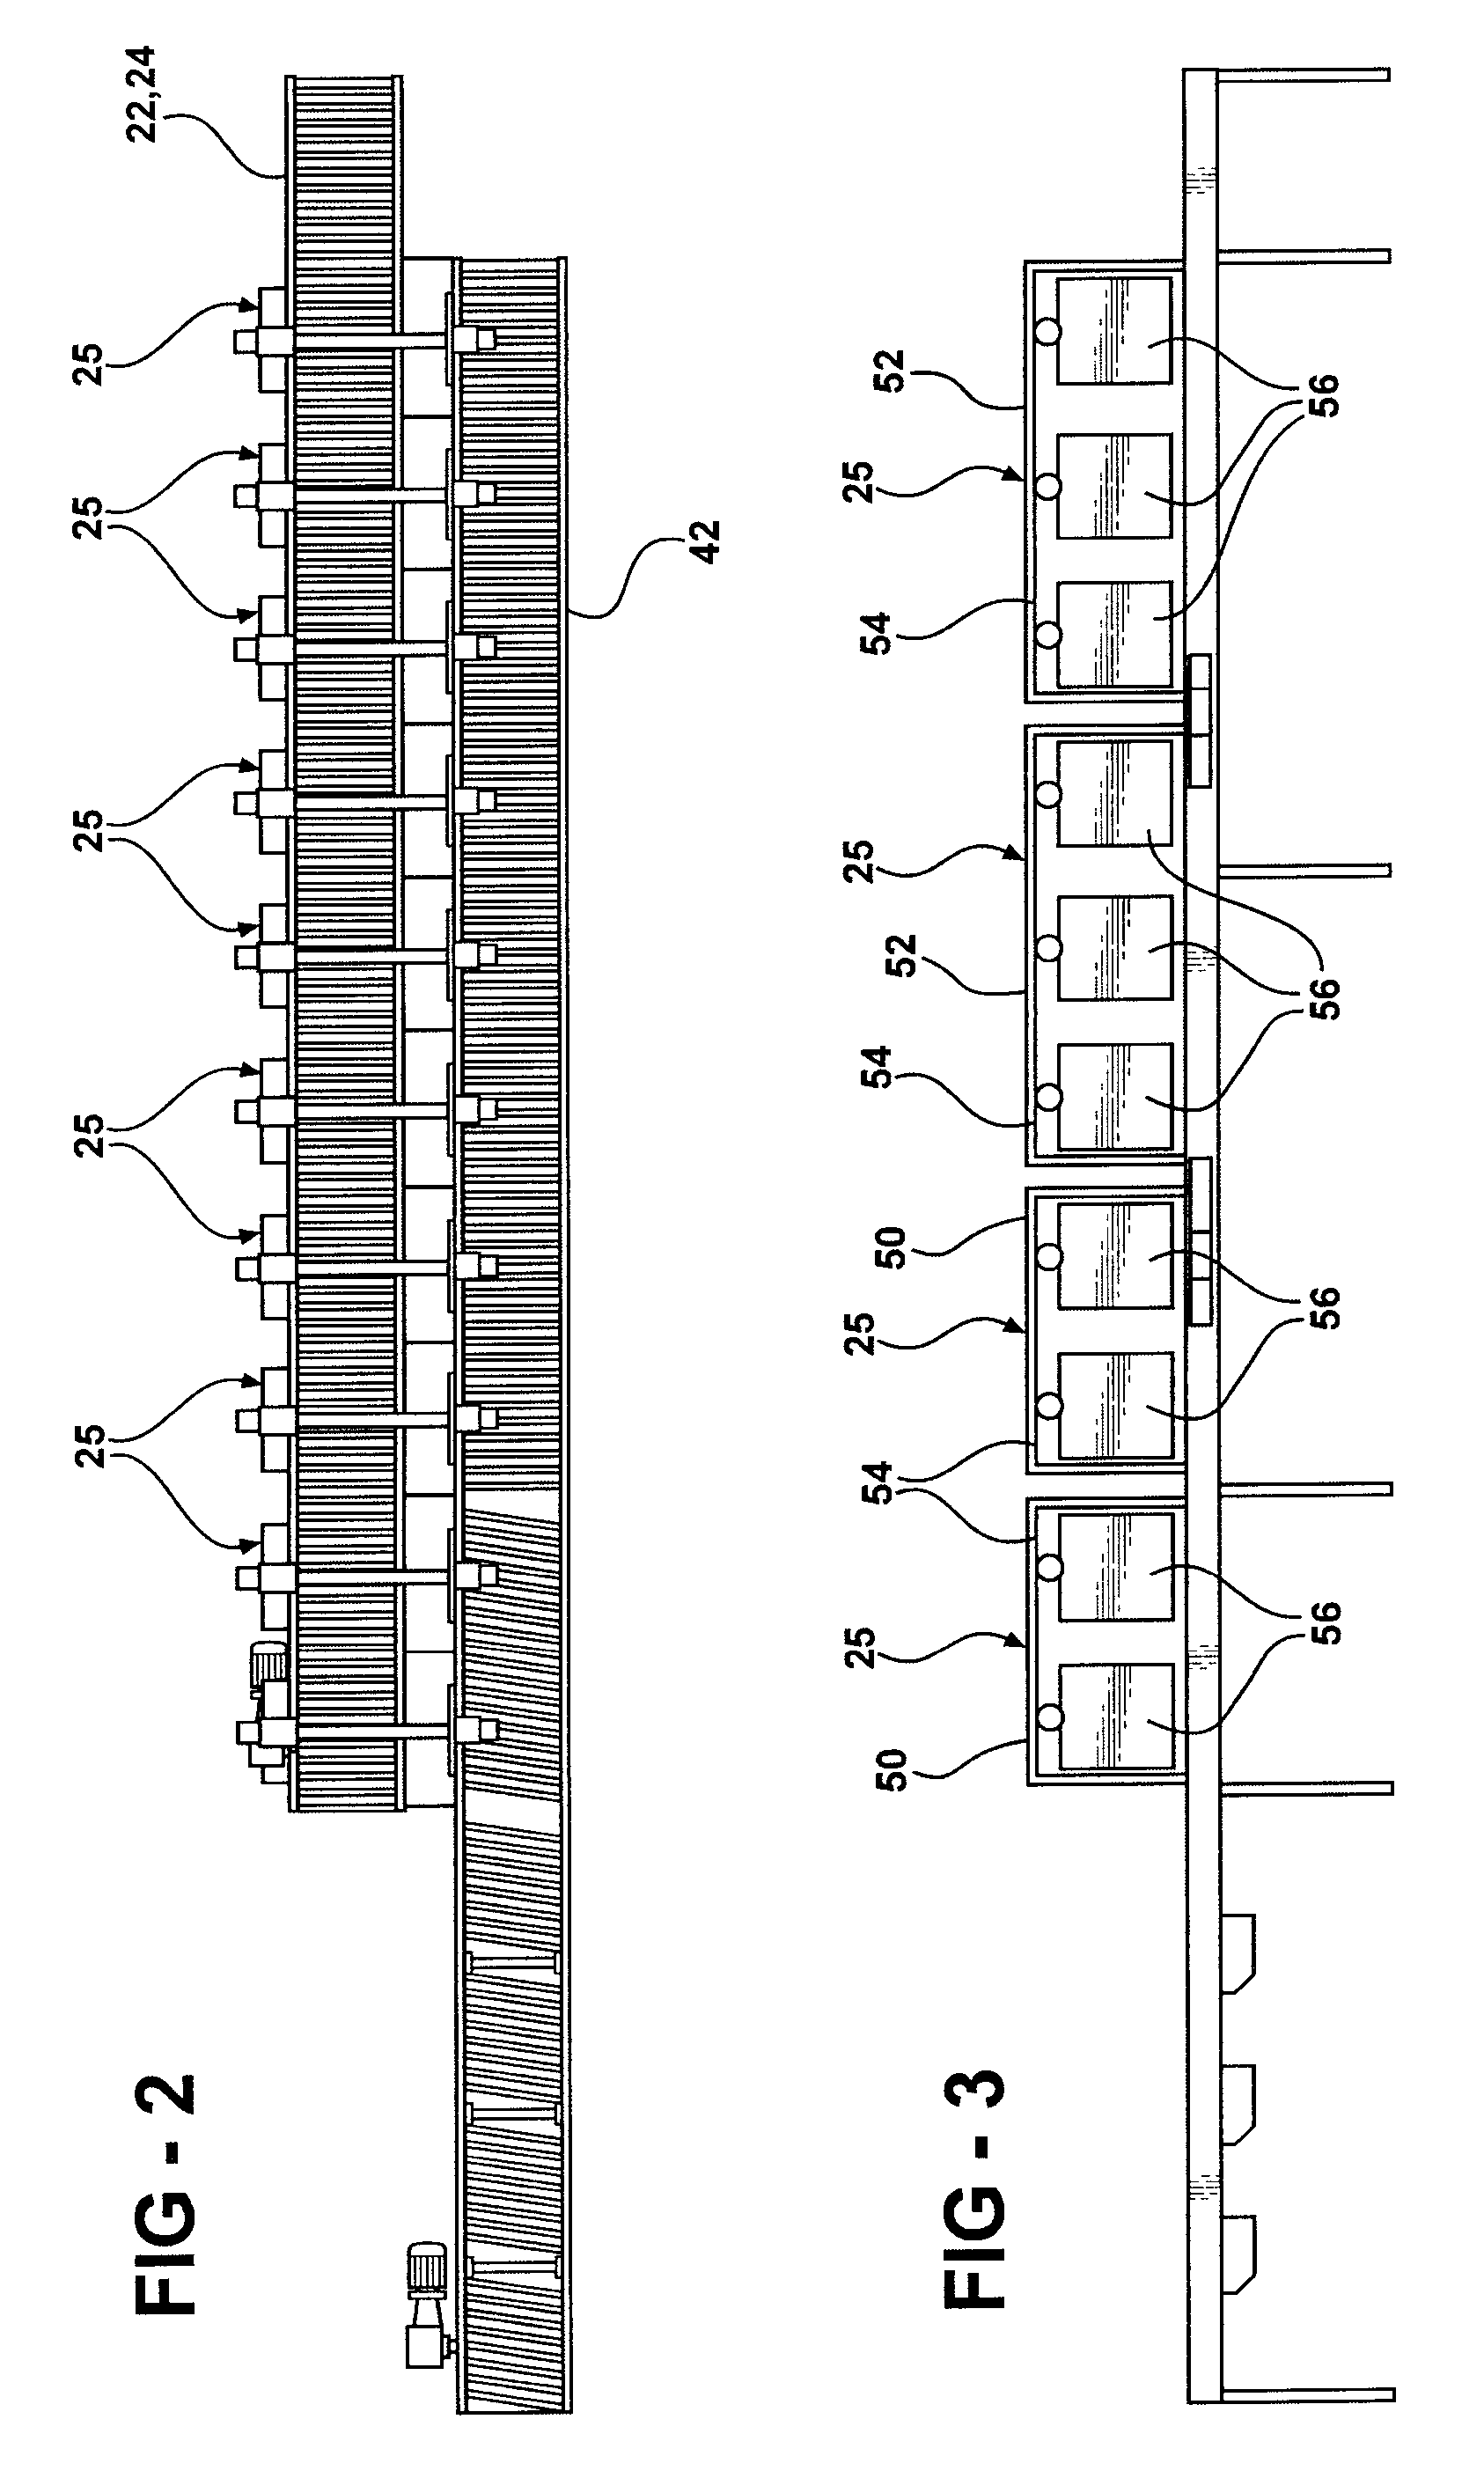 System and method for random mixed palletizing of products